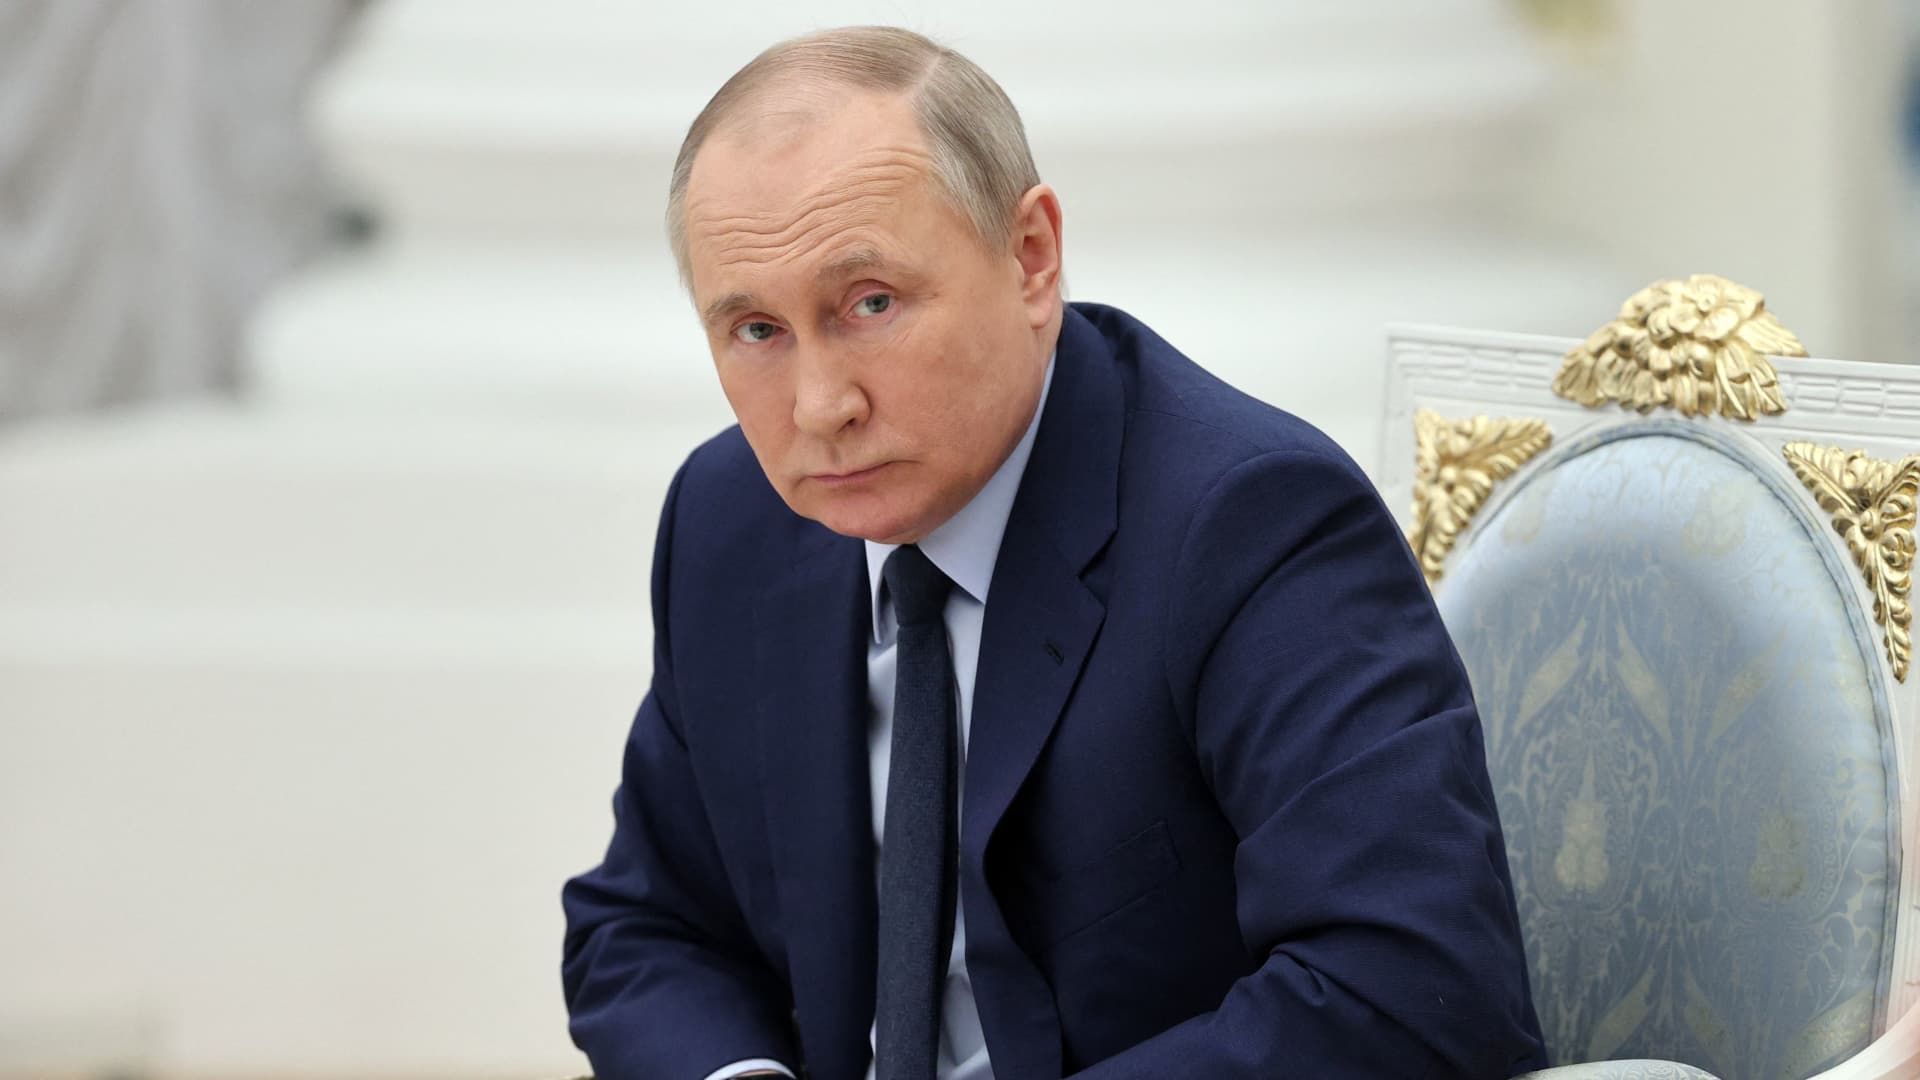 Russian President Vladimir Putin looks on as he holds a meeting of the Russia - Land of Opportunity platform supervisory board at the Catherine's Hall of the Kremlin in Moscow on April 20, 2022.